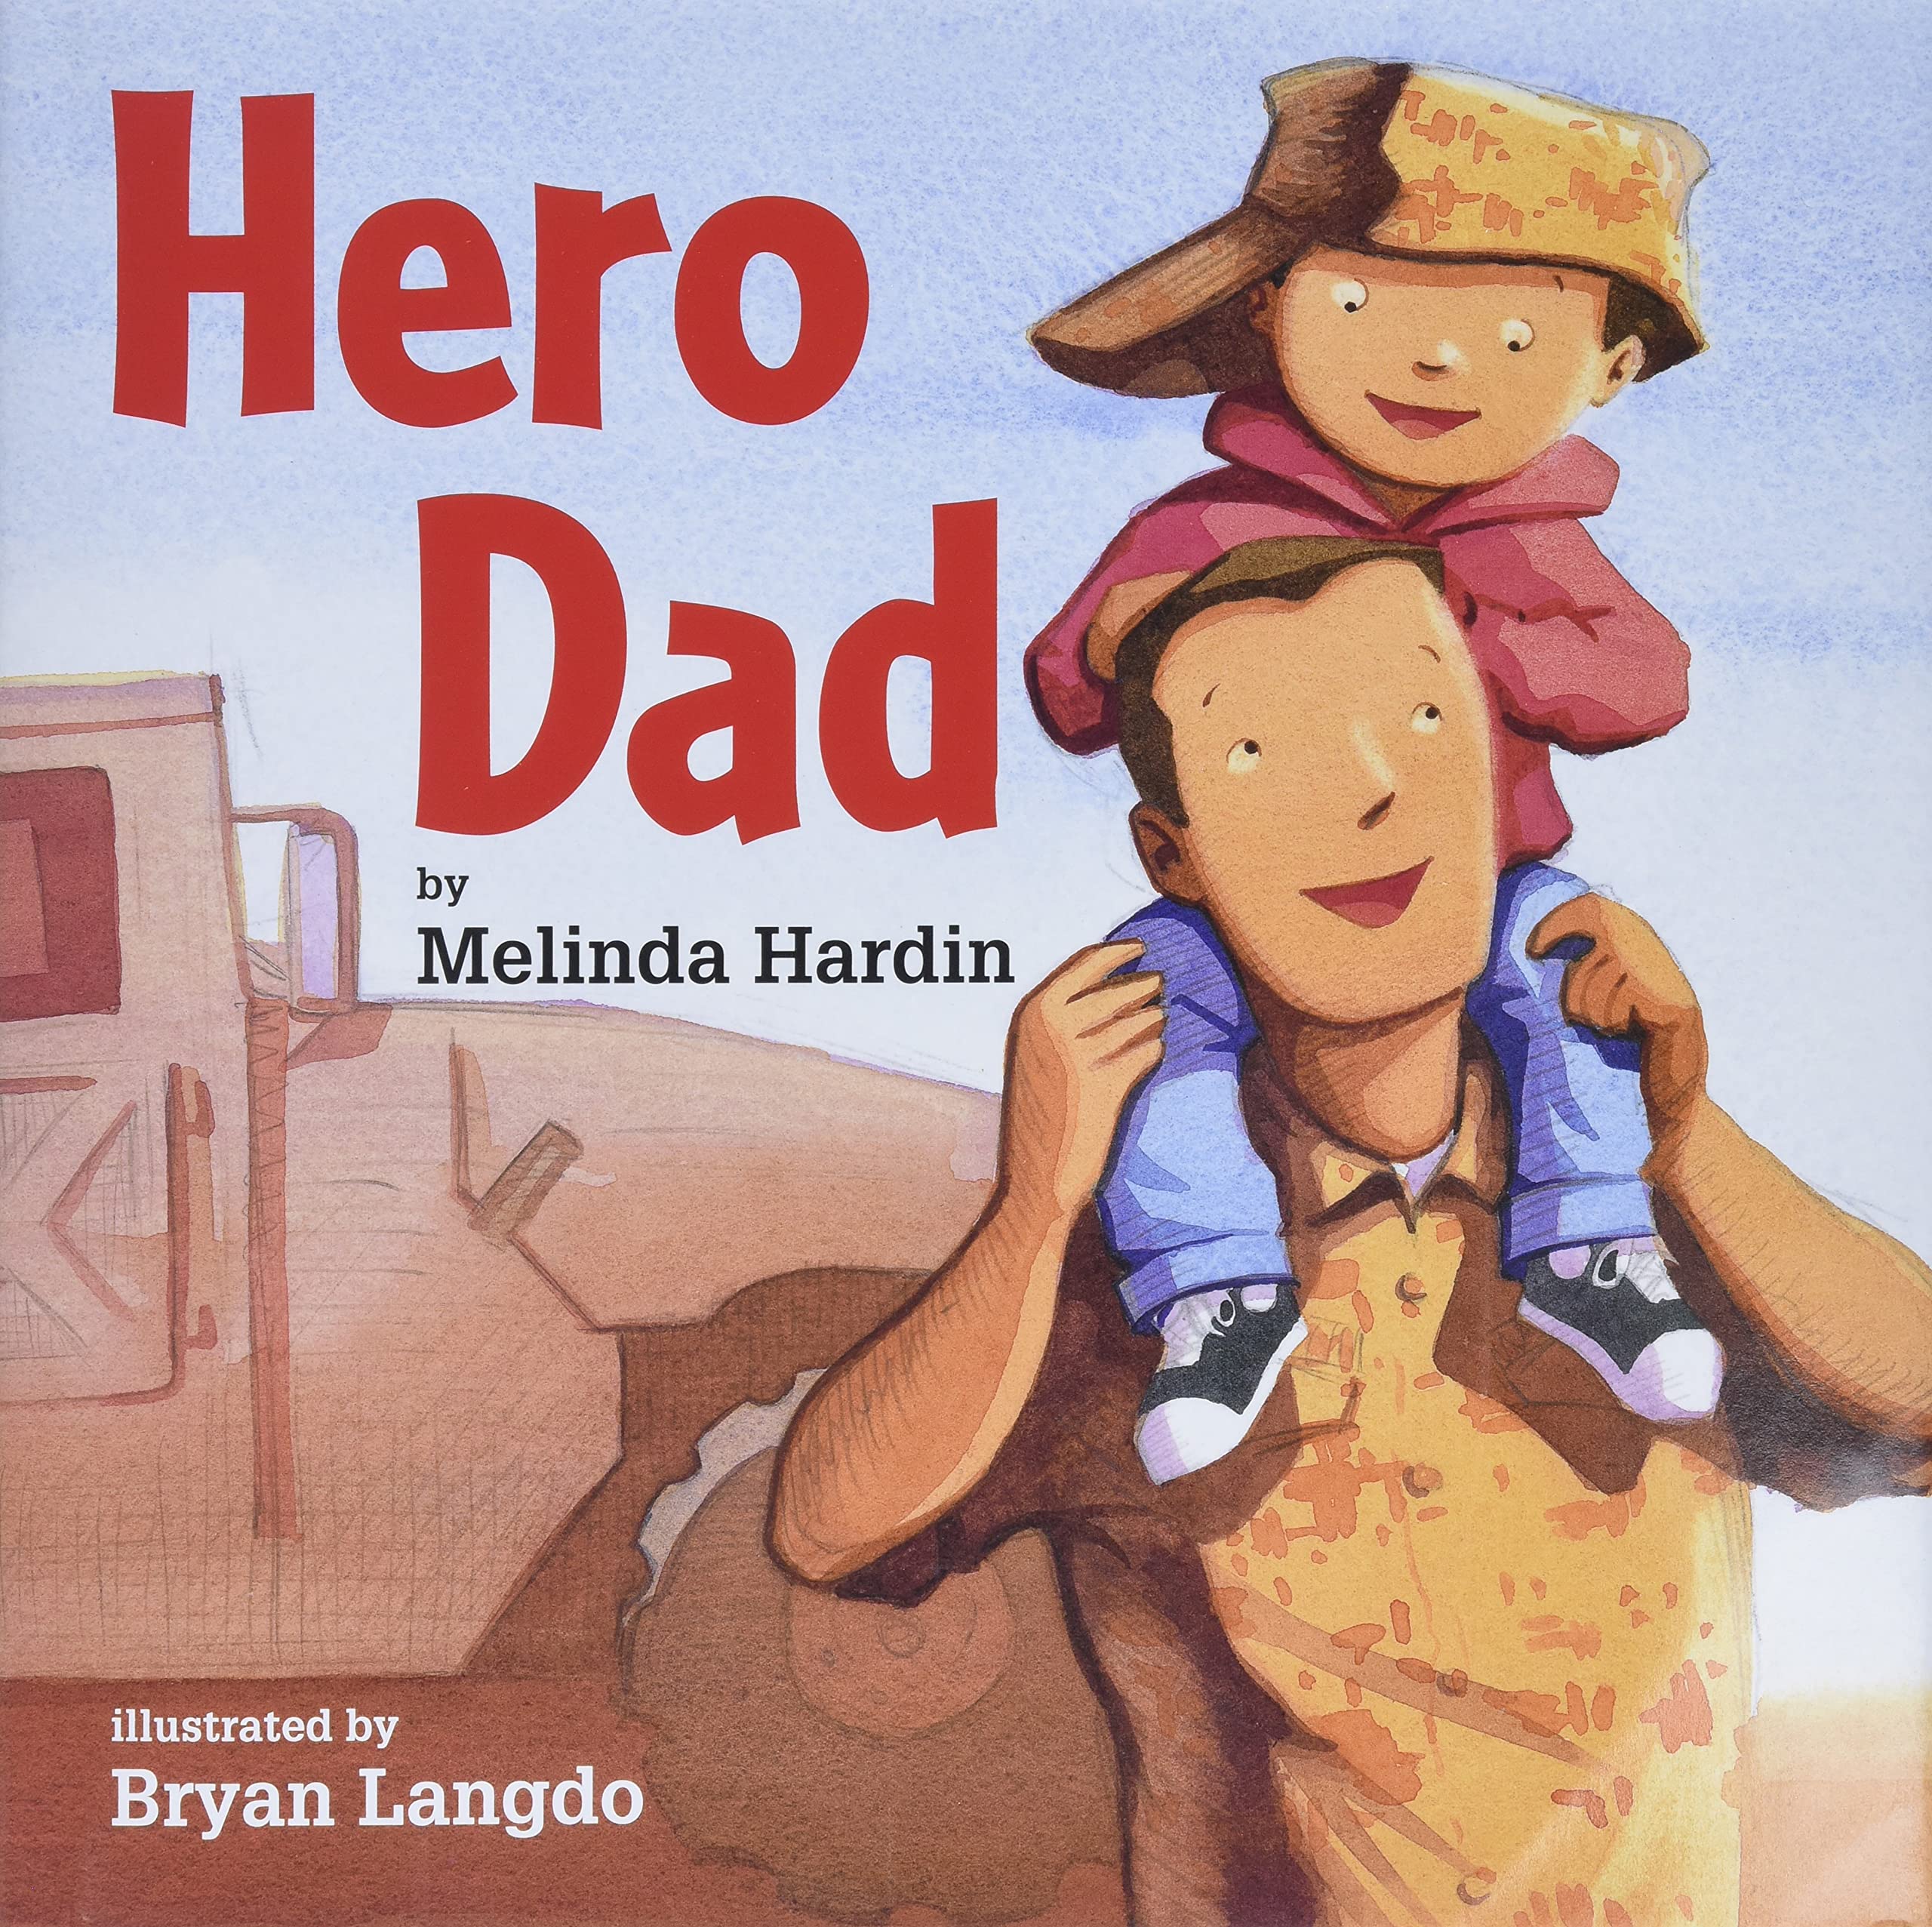 speech and language teaching concepts for Hero Dad in speech therapy